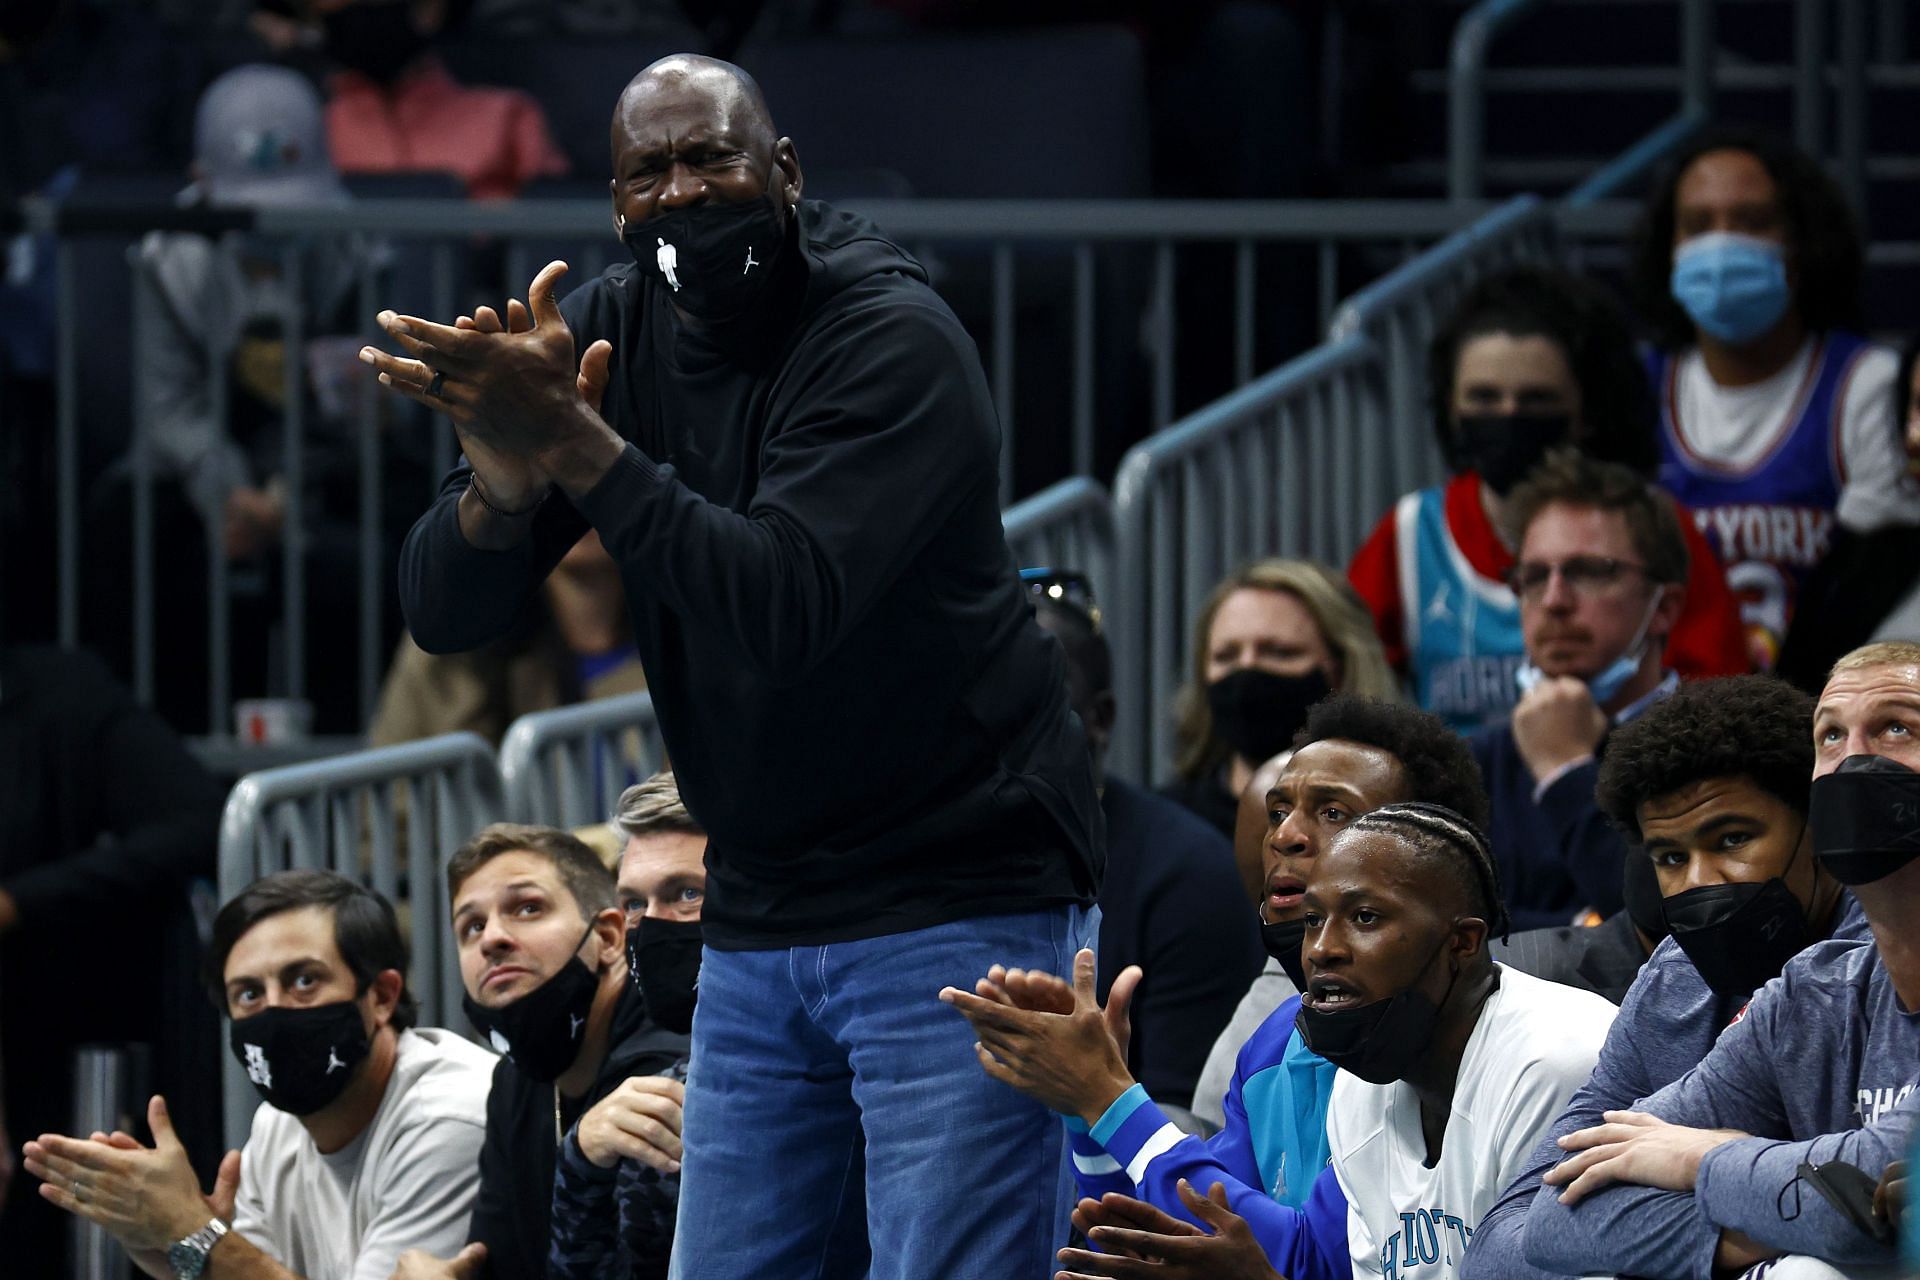 Charlotte Hornets owner and Hall of Famer Michael Jordan reacts during the first half of their game against the New York Knicks at Spectrum Center on November 12, 2021 in Charlotte, North Carolina.